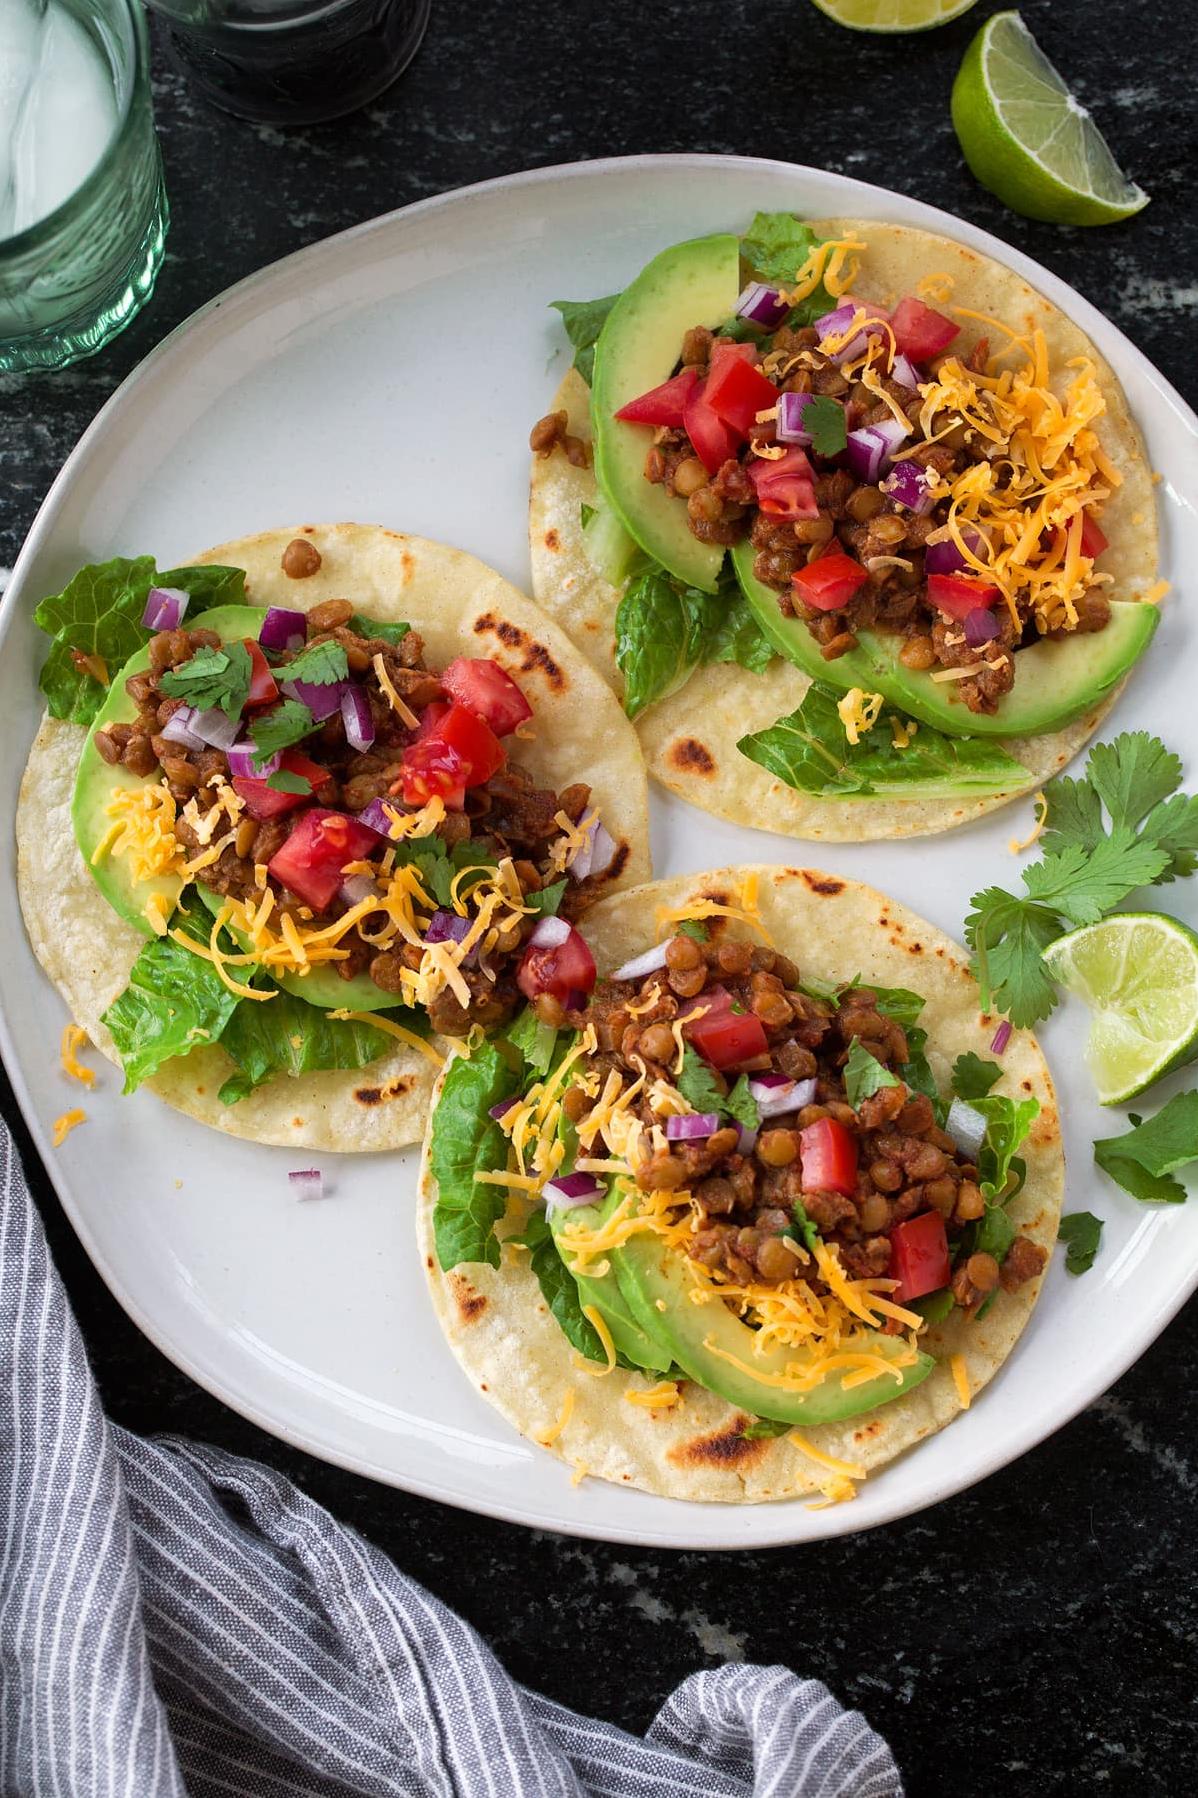  Got a crock pot? Then you're on your way to delicious vegan tacos that will make even meat-eaters drool!